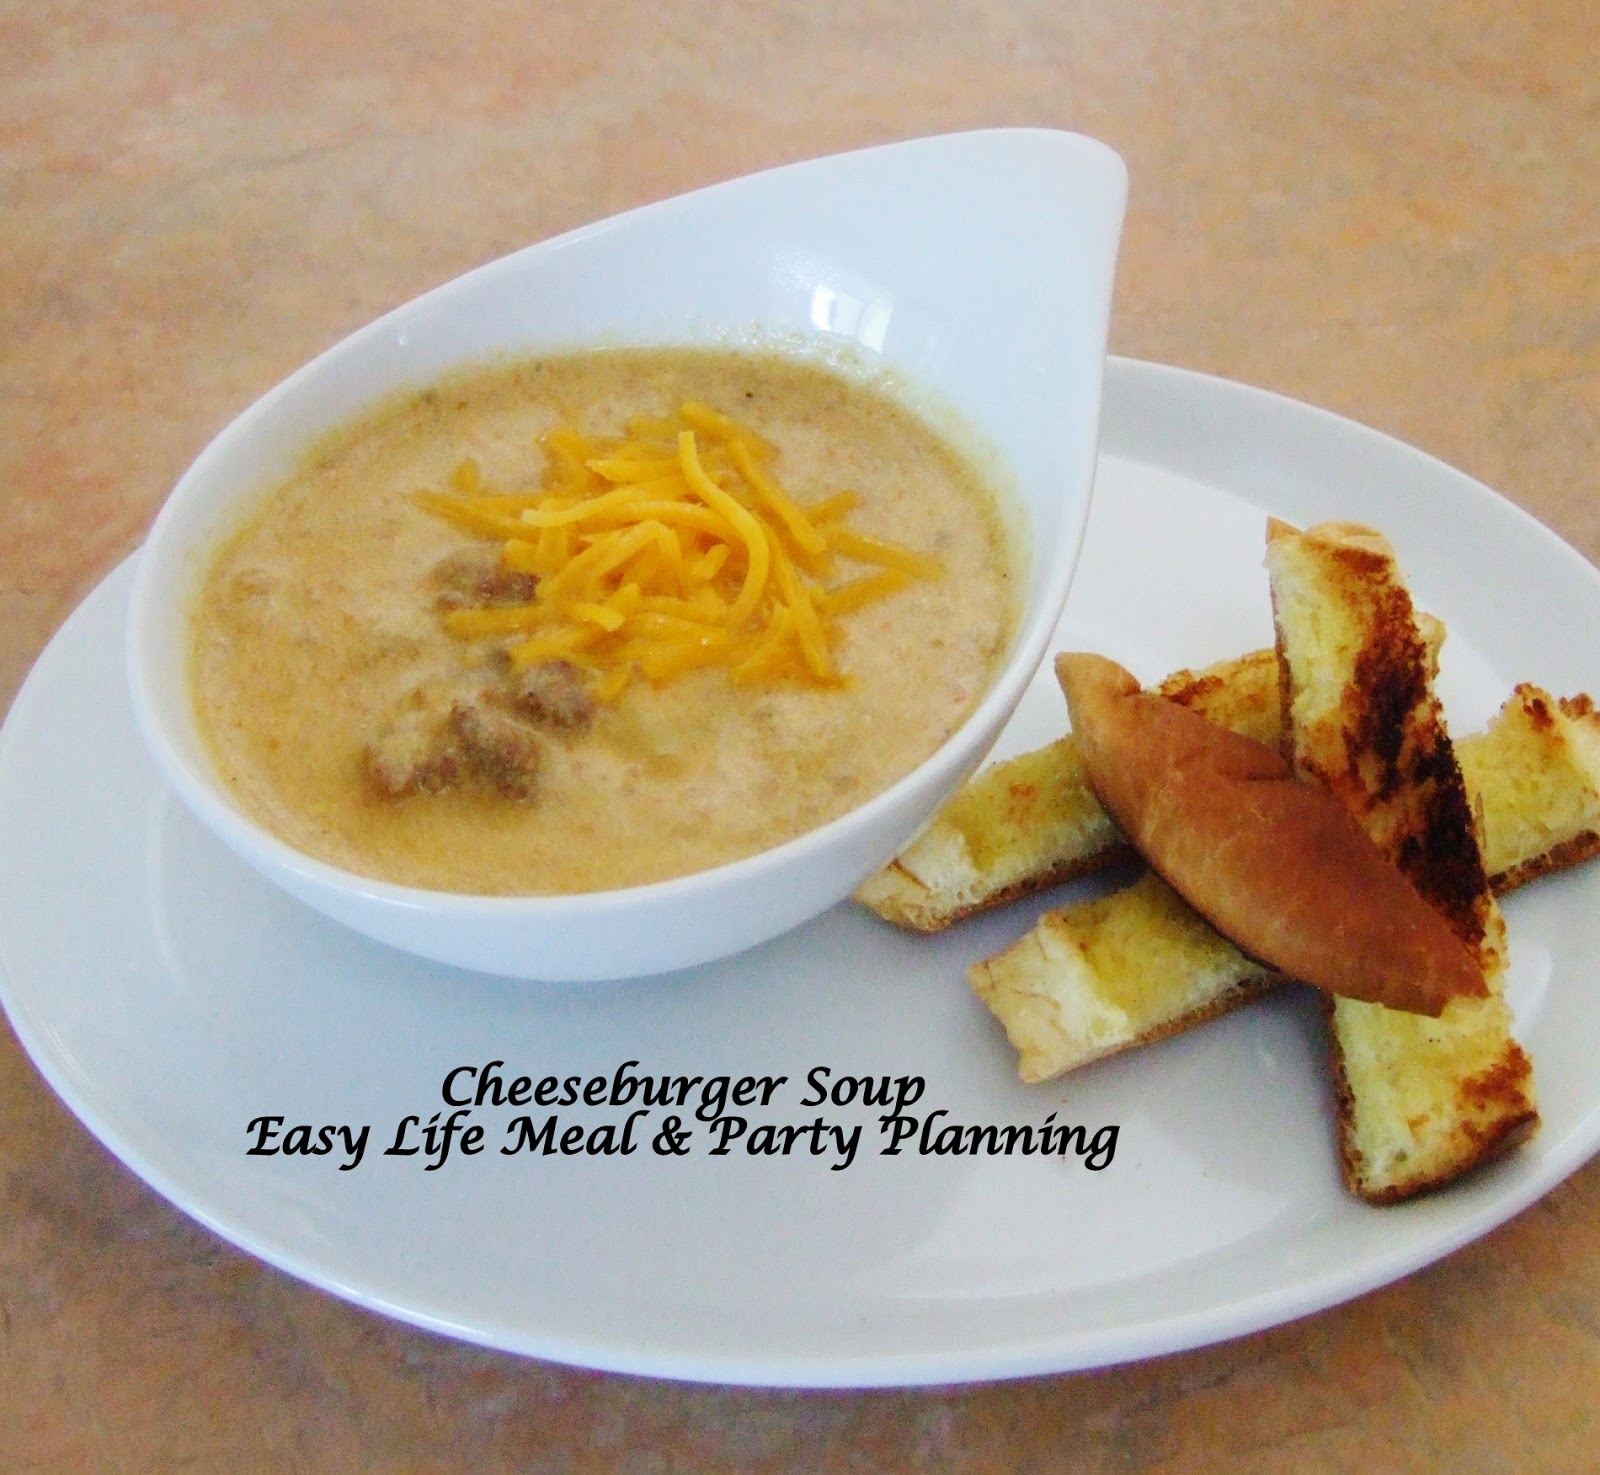 Cheeseburger Soup by Easy Life Meal & Party Planning 